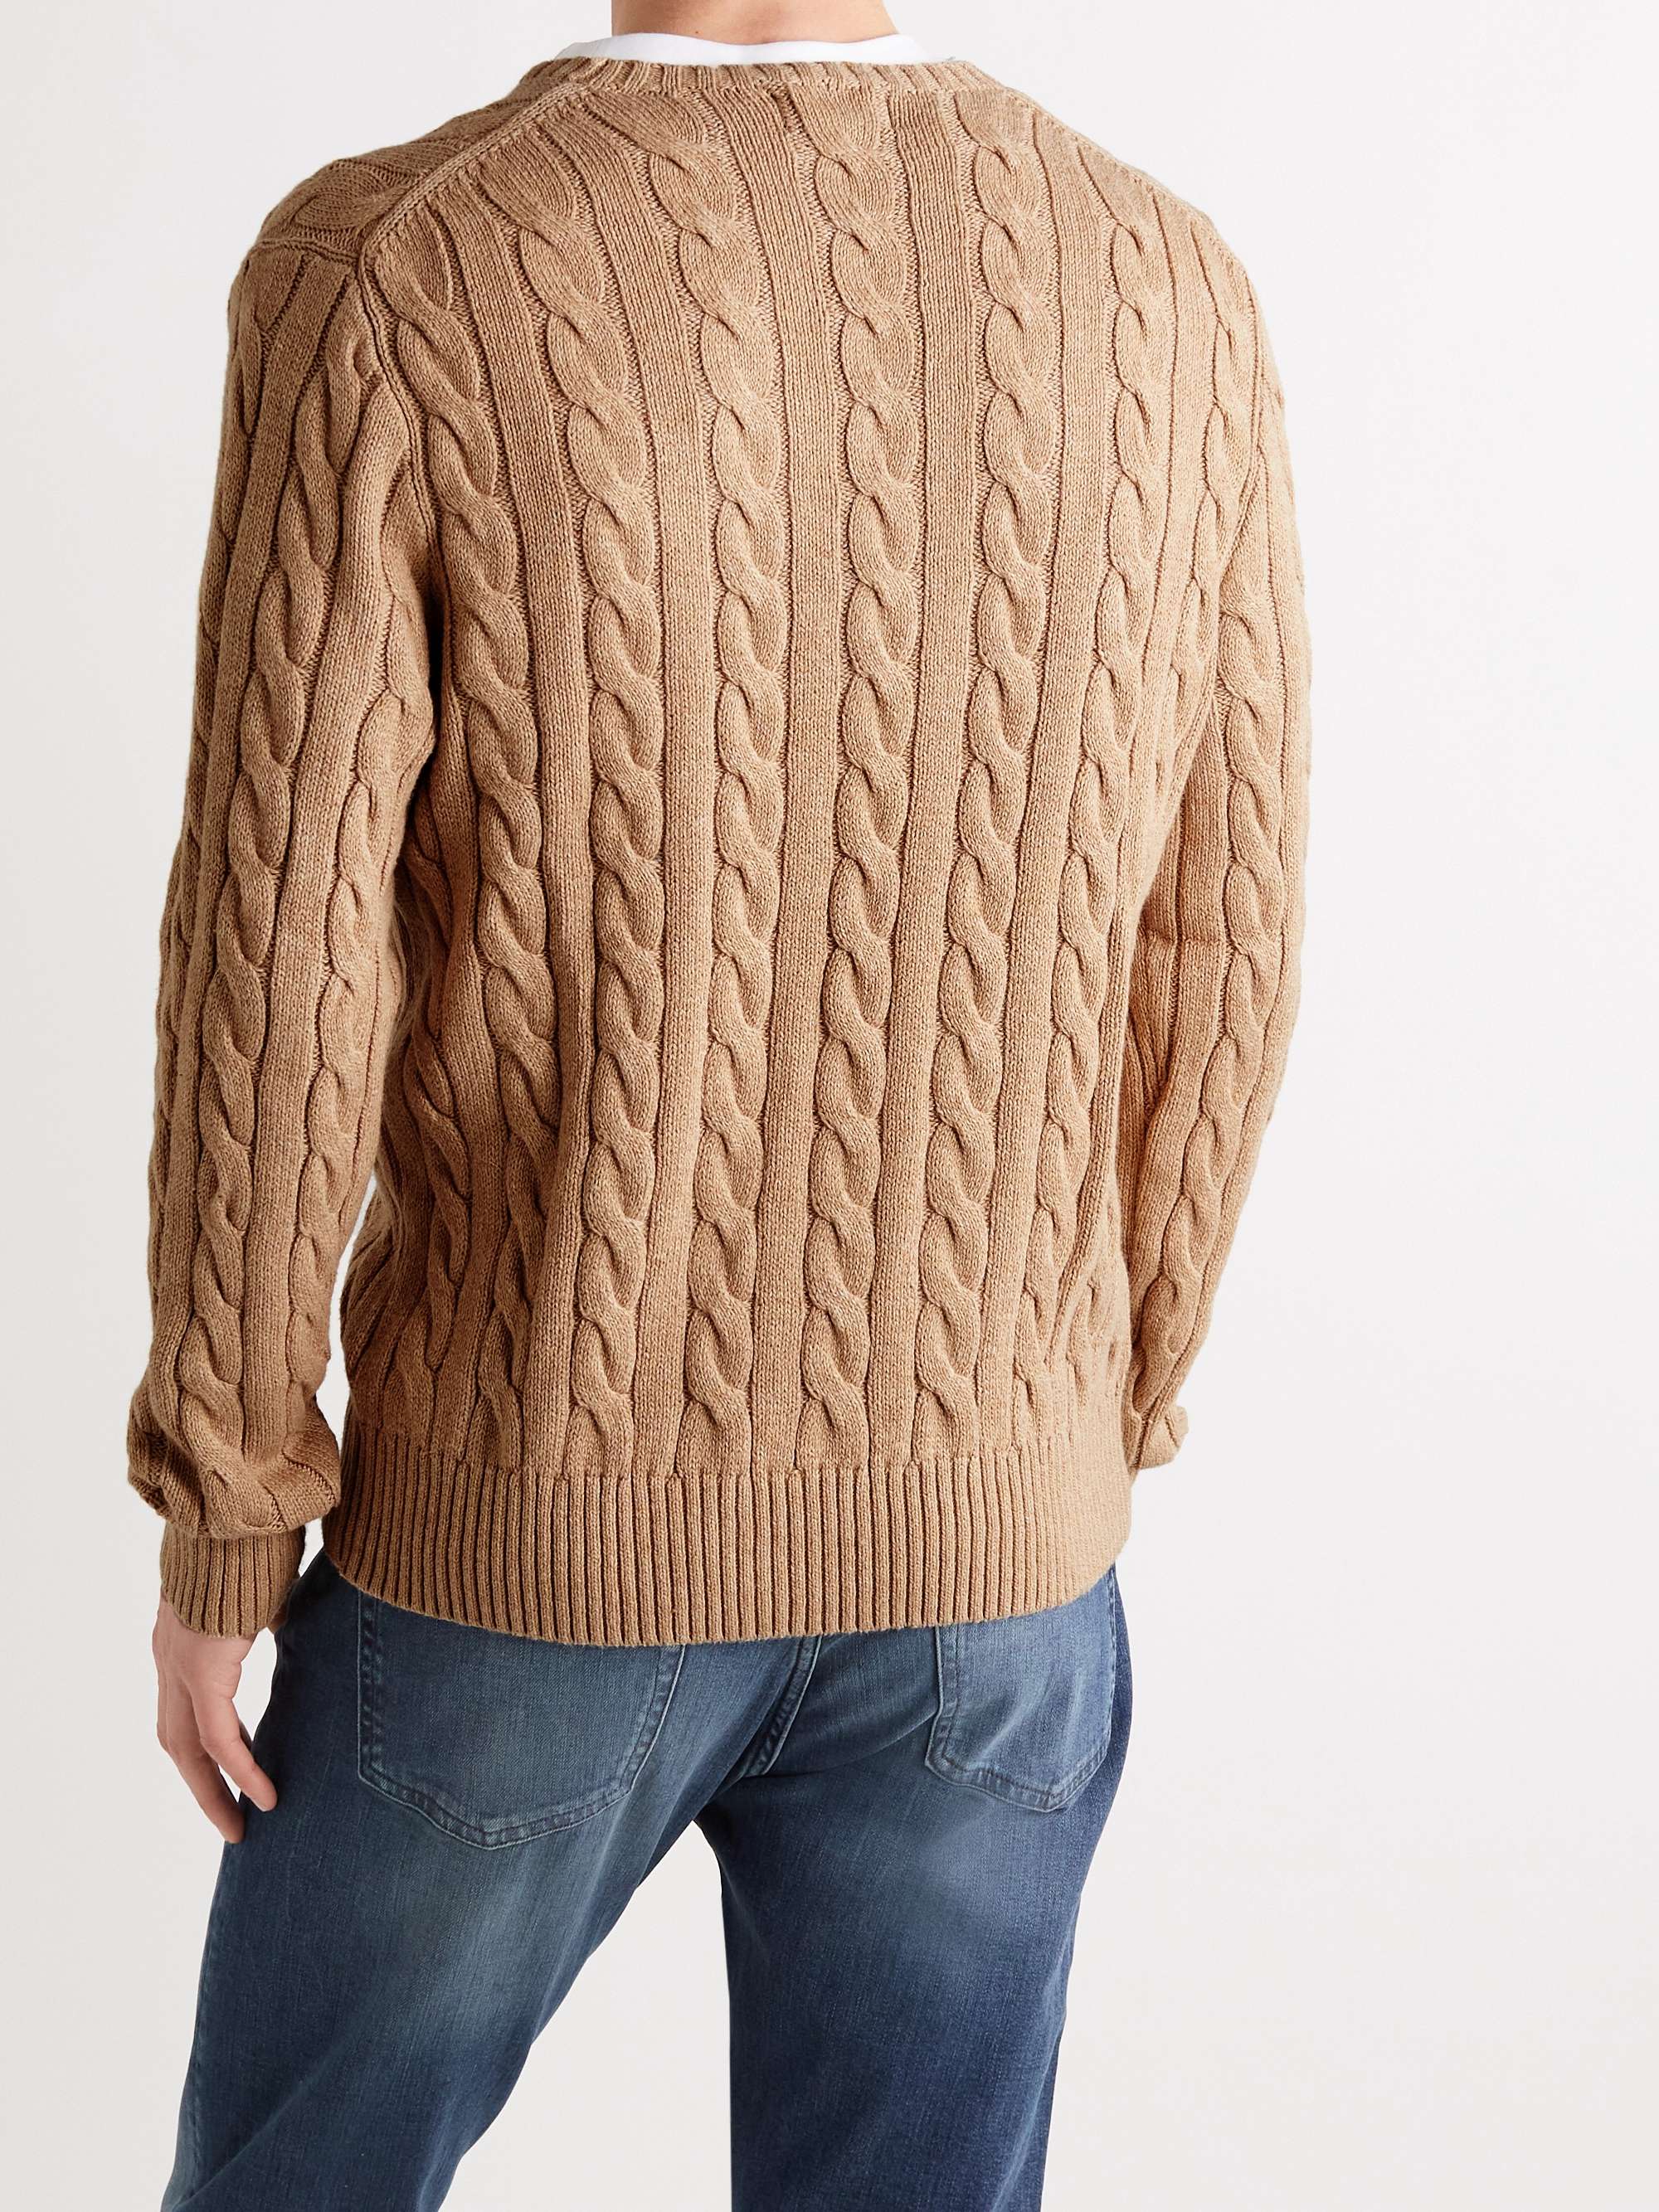 Mens Clothing Sweaters and knitwear for Men Natural Polo Ralph Lauren Cable Knit Cotton Jumper in Beige 